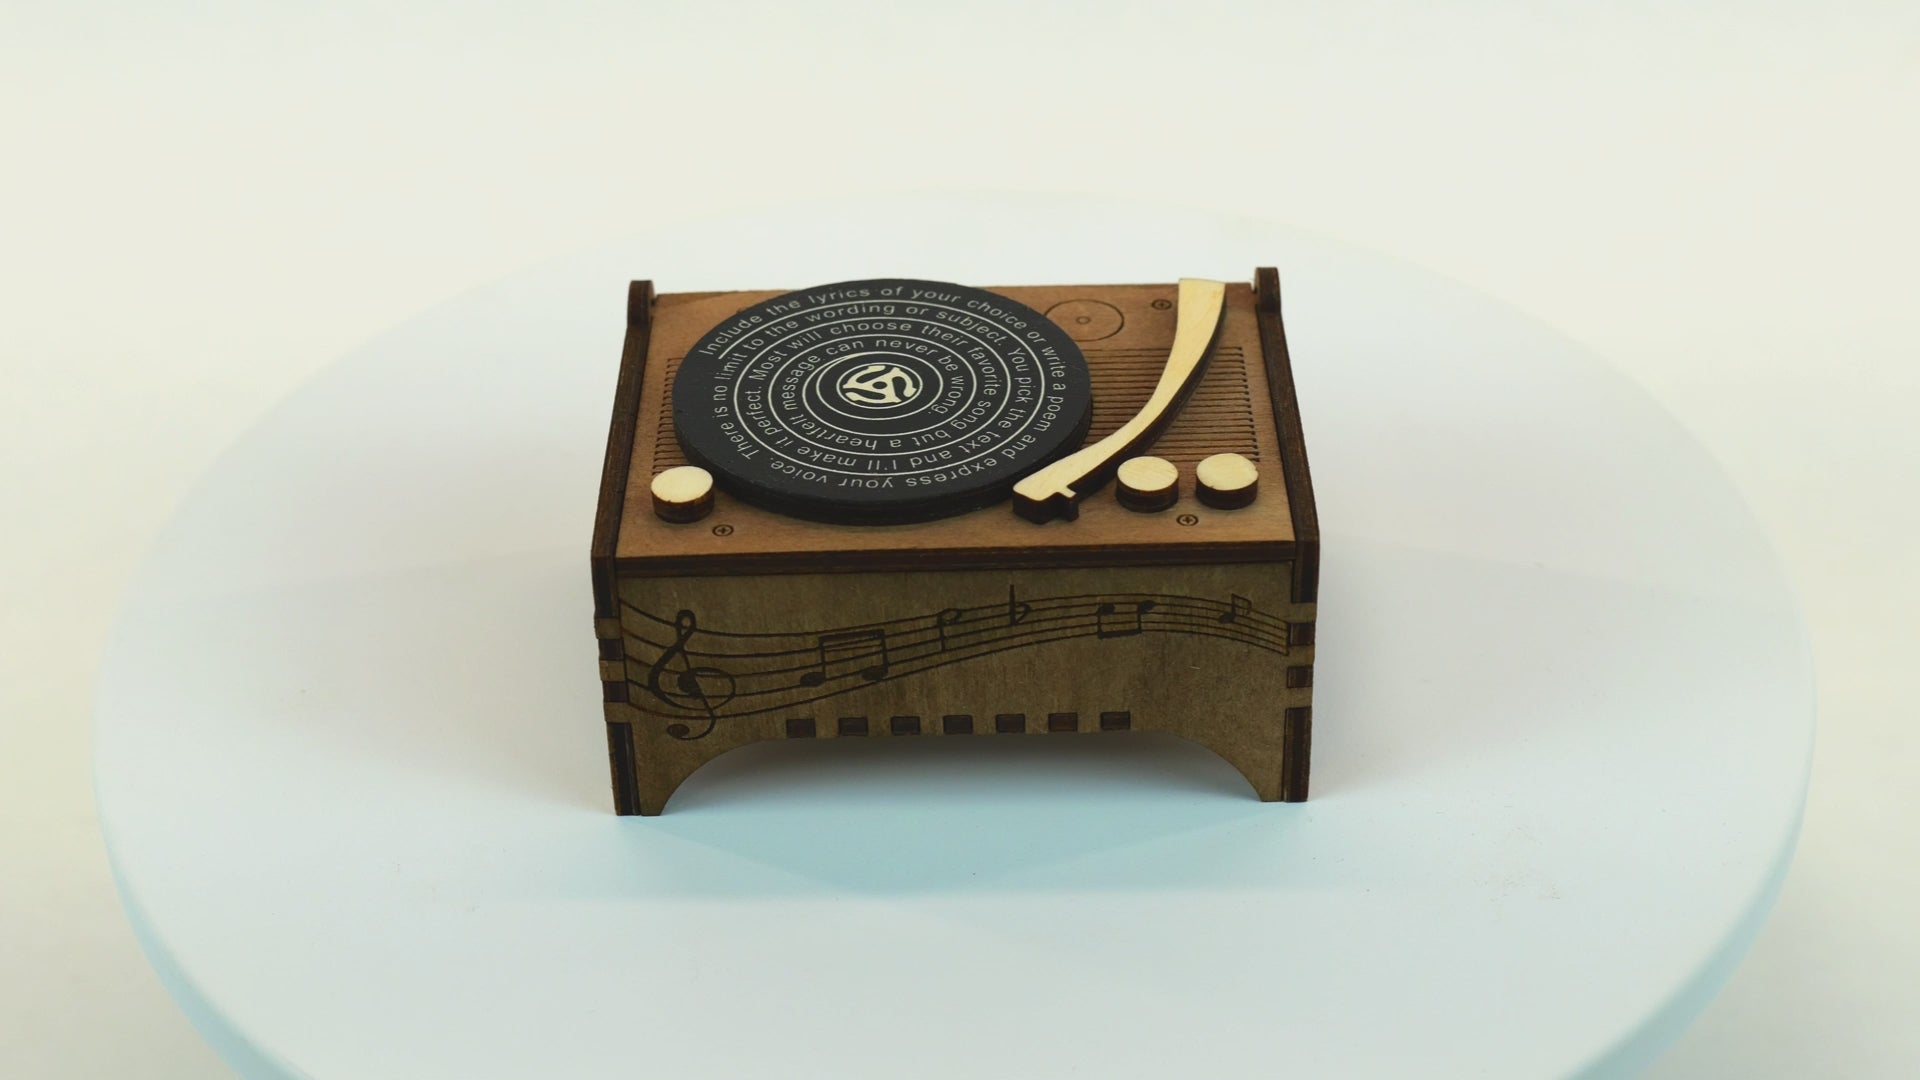 Plays Any Song Lyrics Music Box, Record Player Music Box With